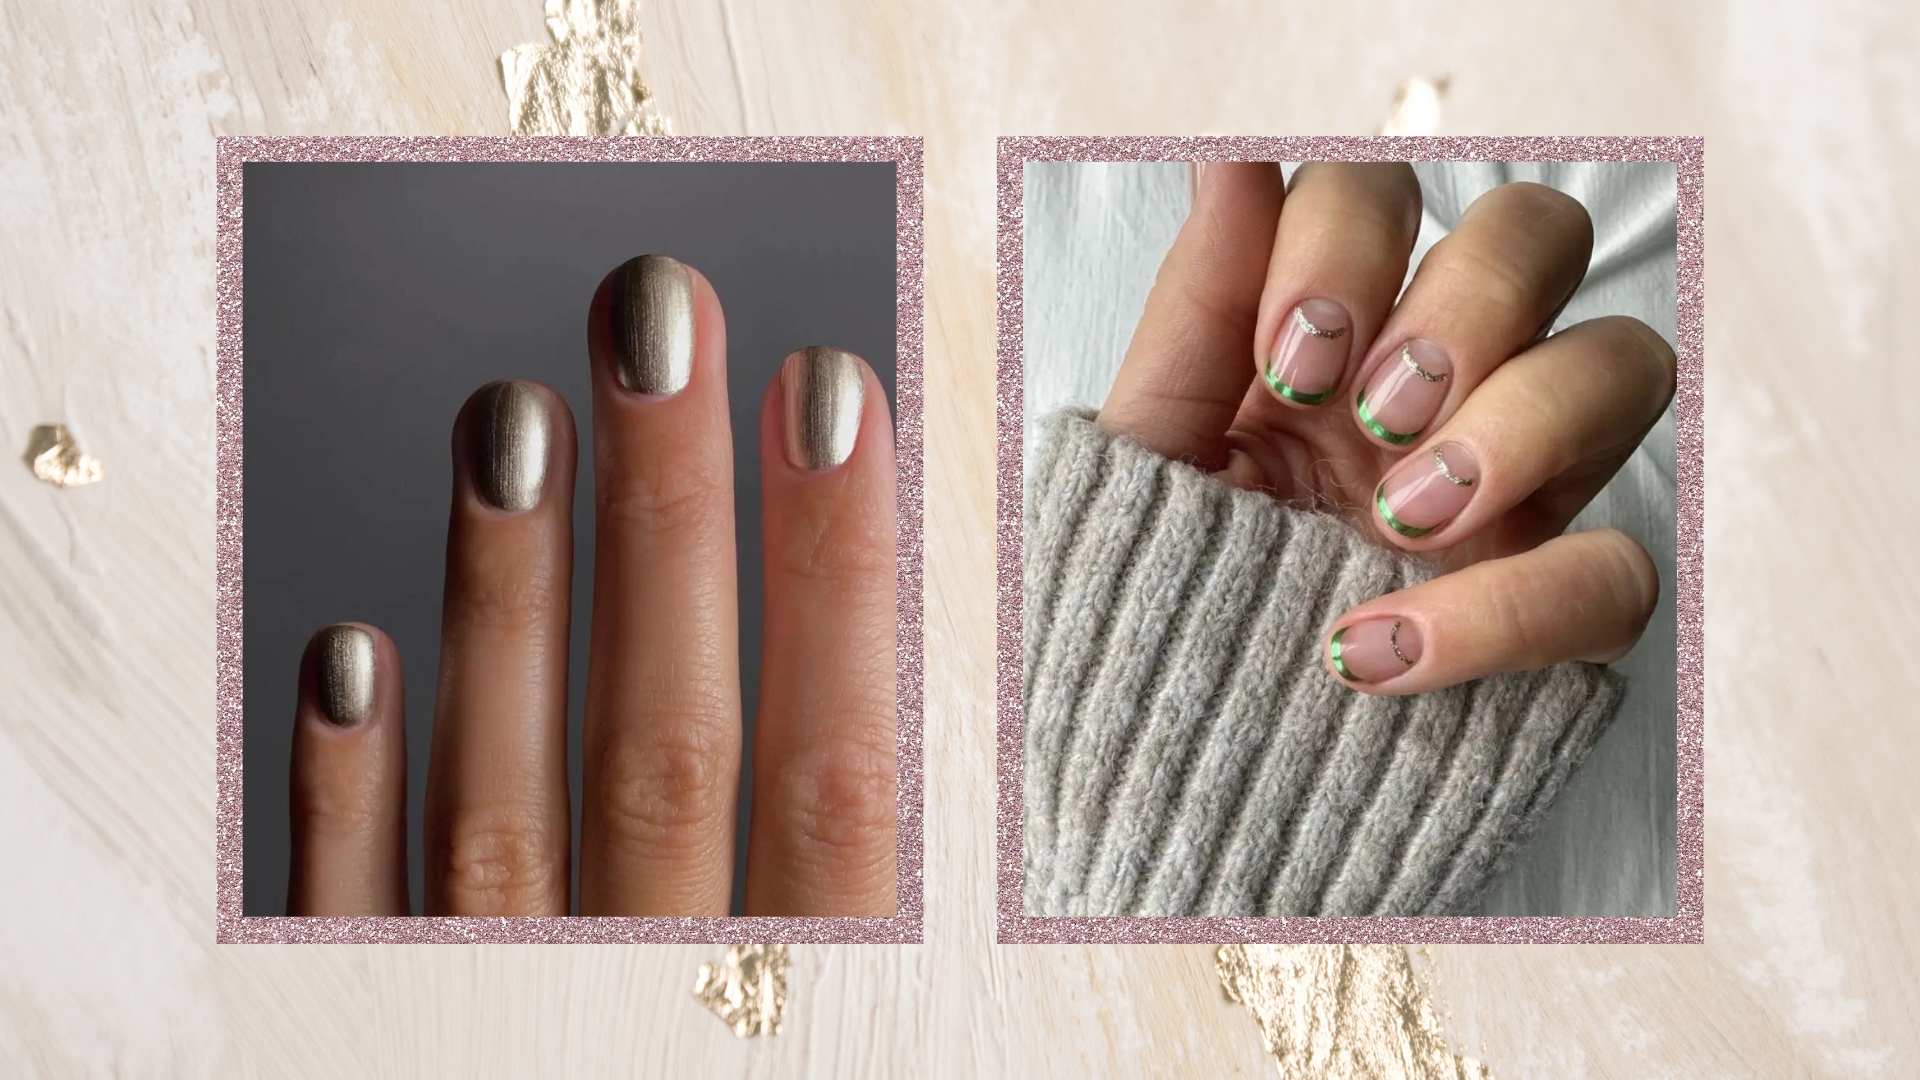 These 16 festive nails bring Christmas to your fingertips